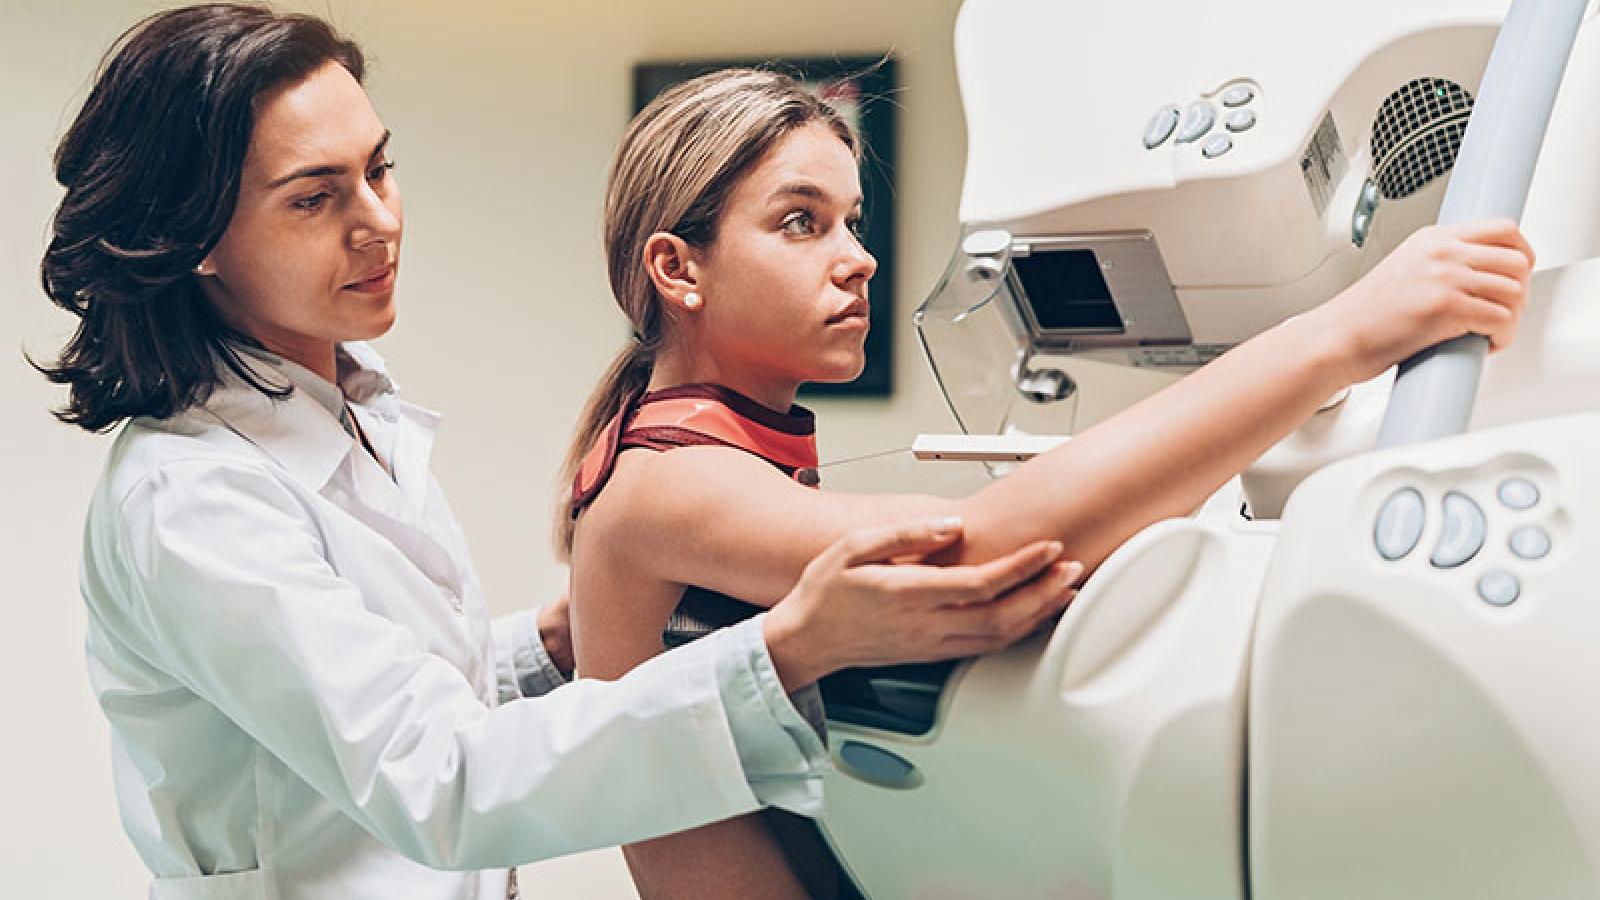 When Should You Get Screened For Breast Cancer?